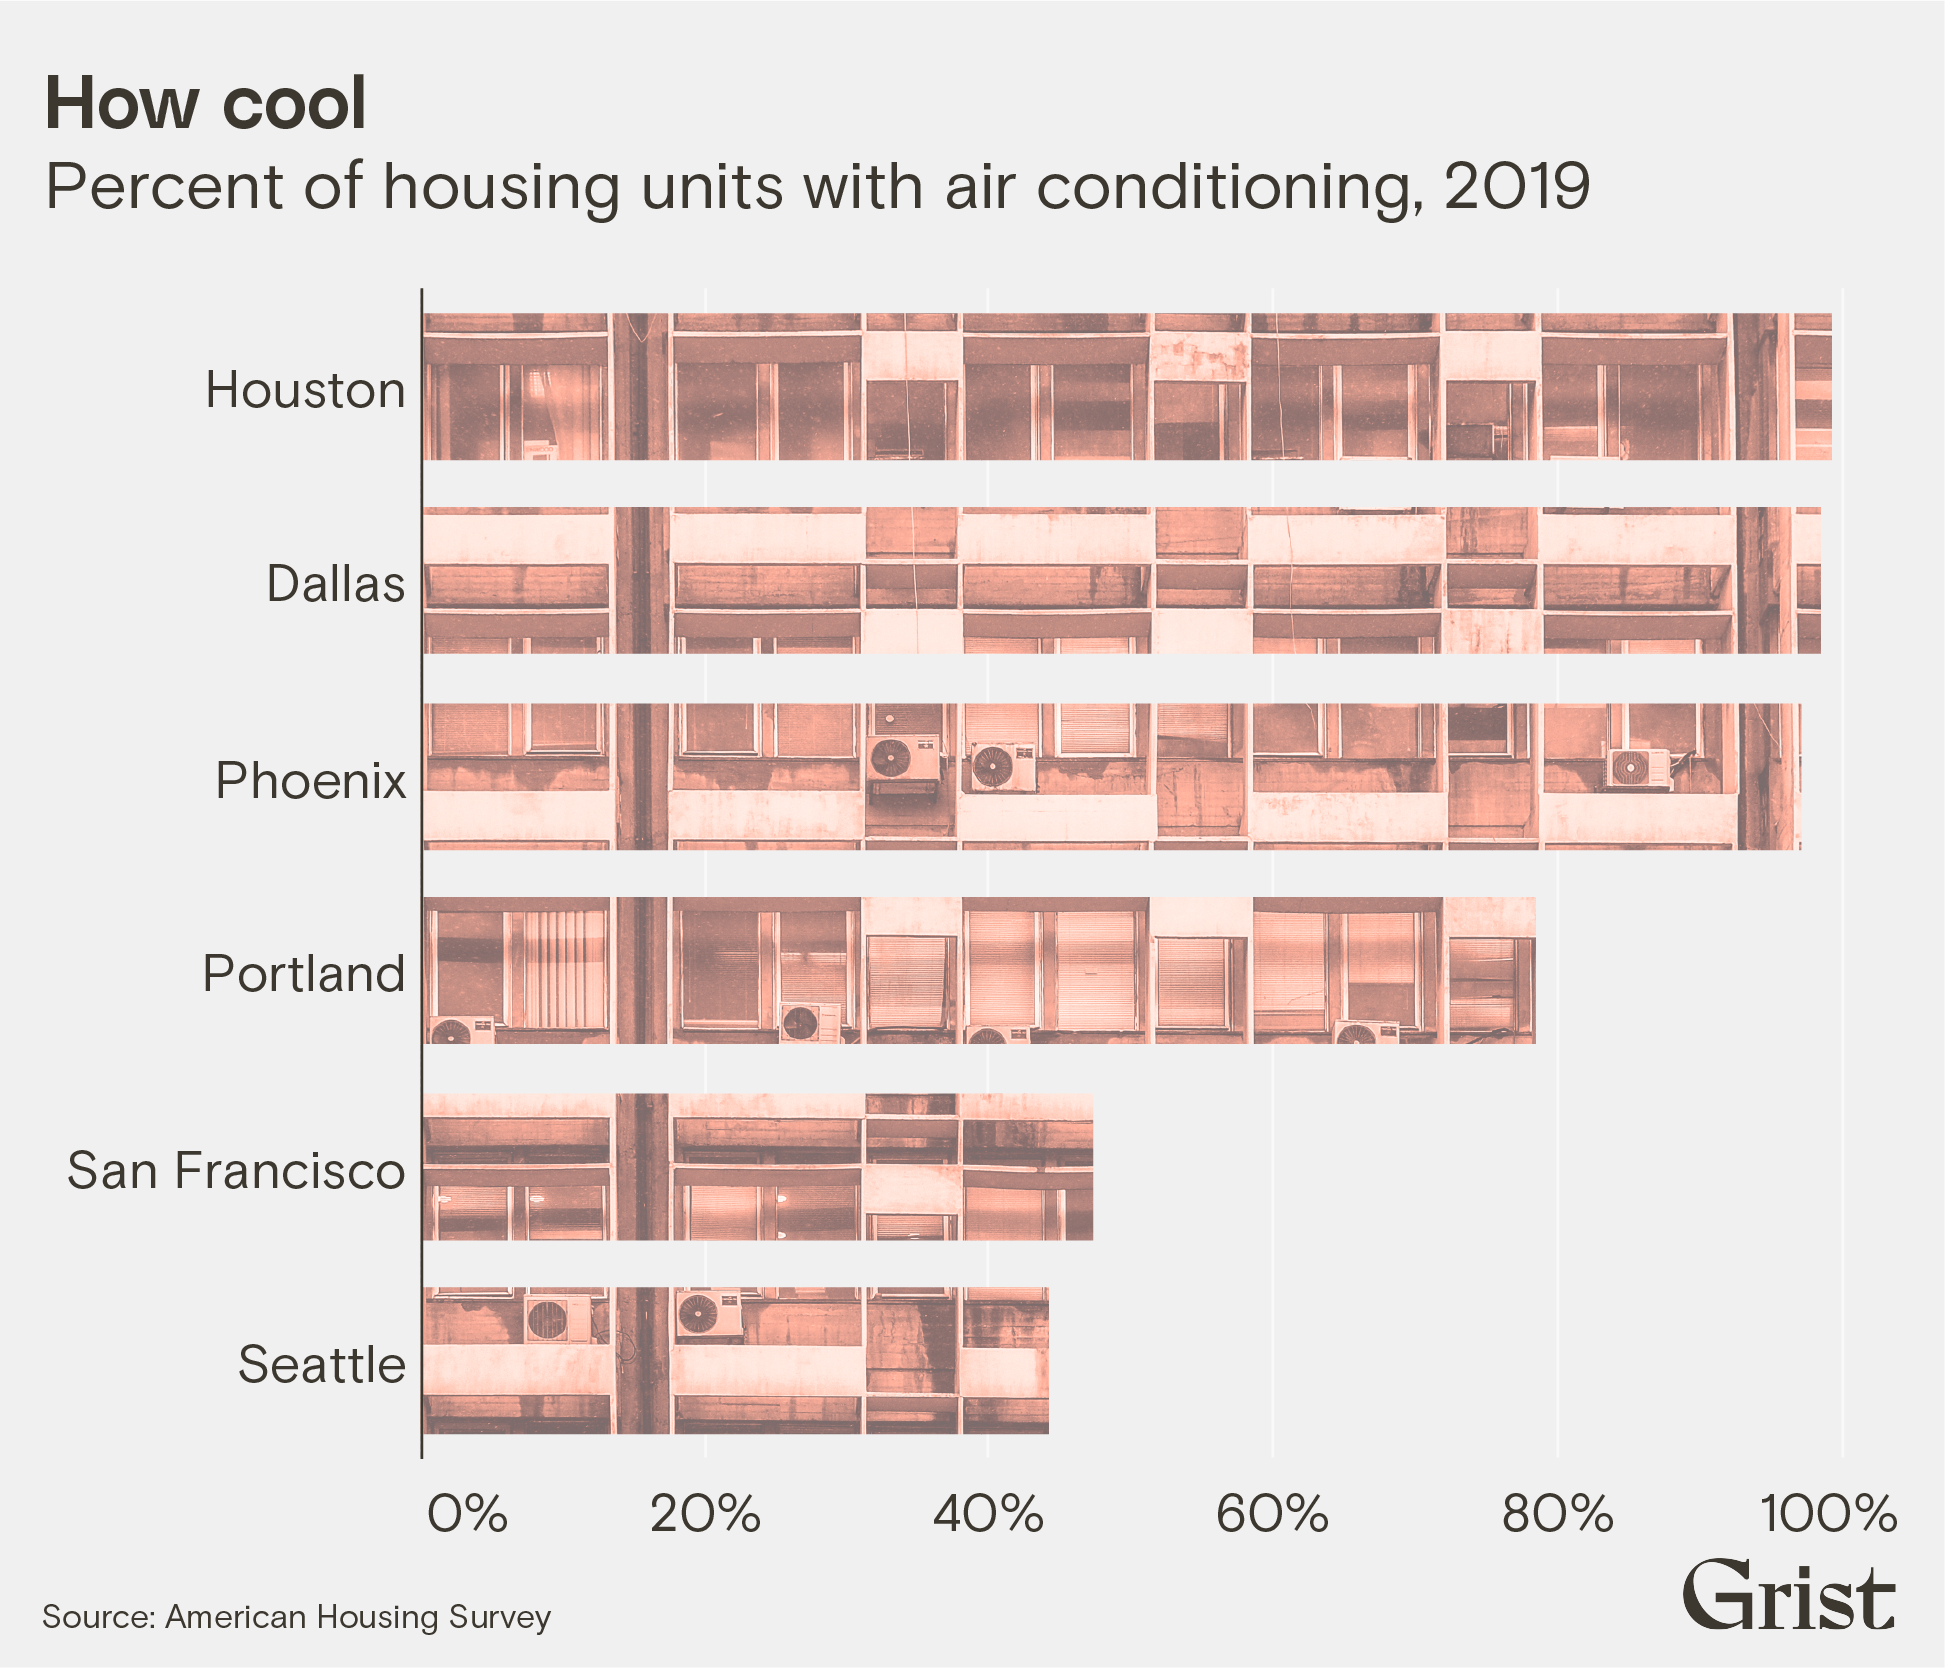 A chart showing what percentage of households have air conditioning in several major U.S. cities